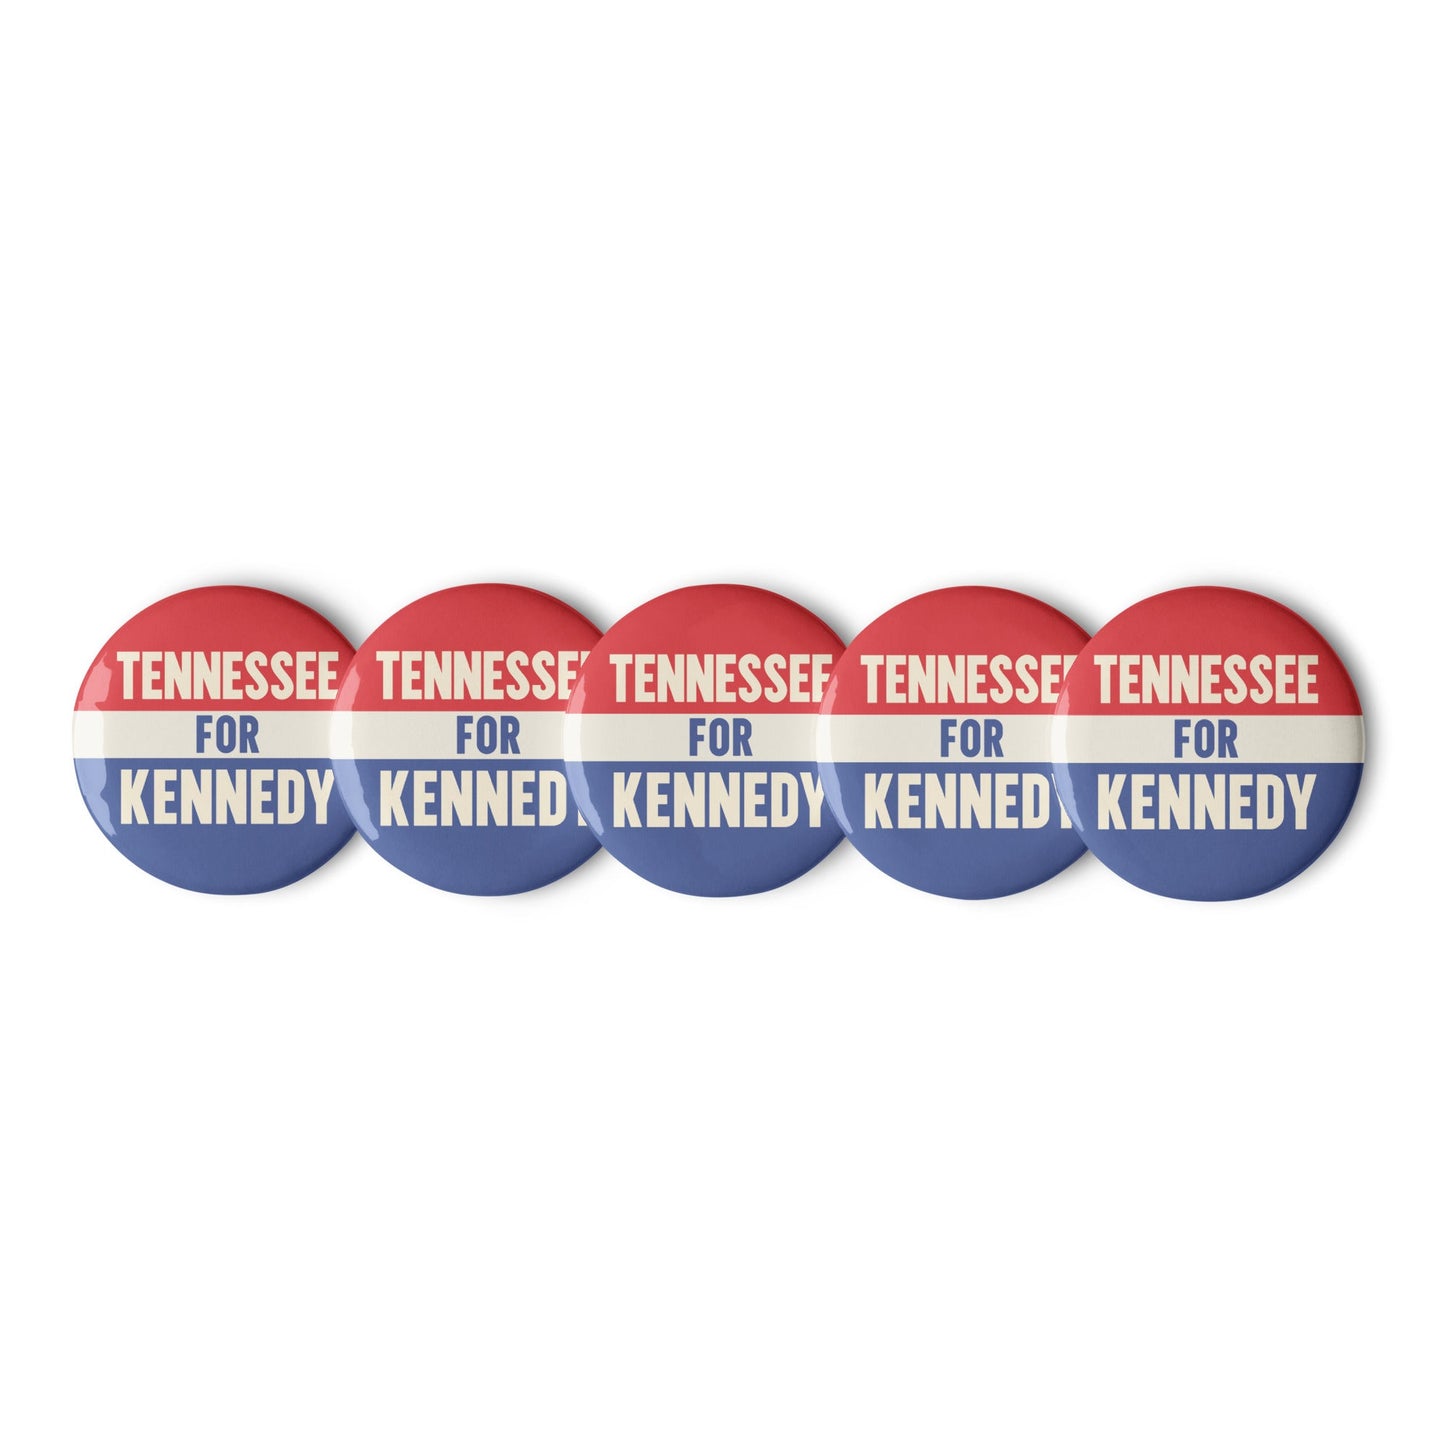 Tennessee for Kennedy (5 Buttons) - TEAM KENNEDY. All rights reserved